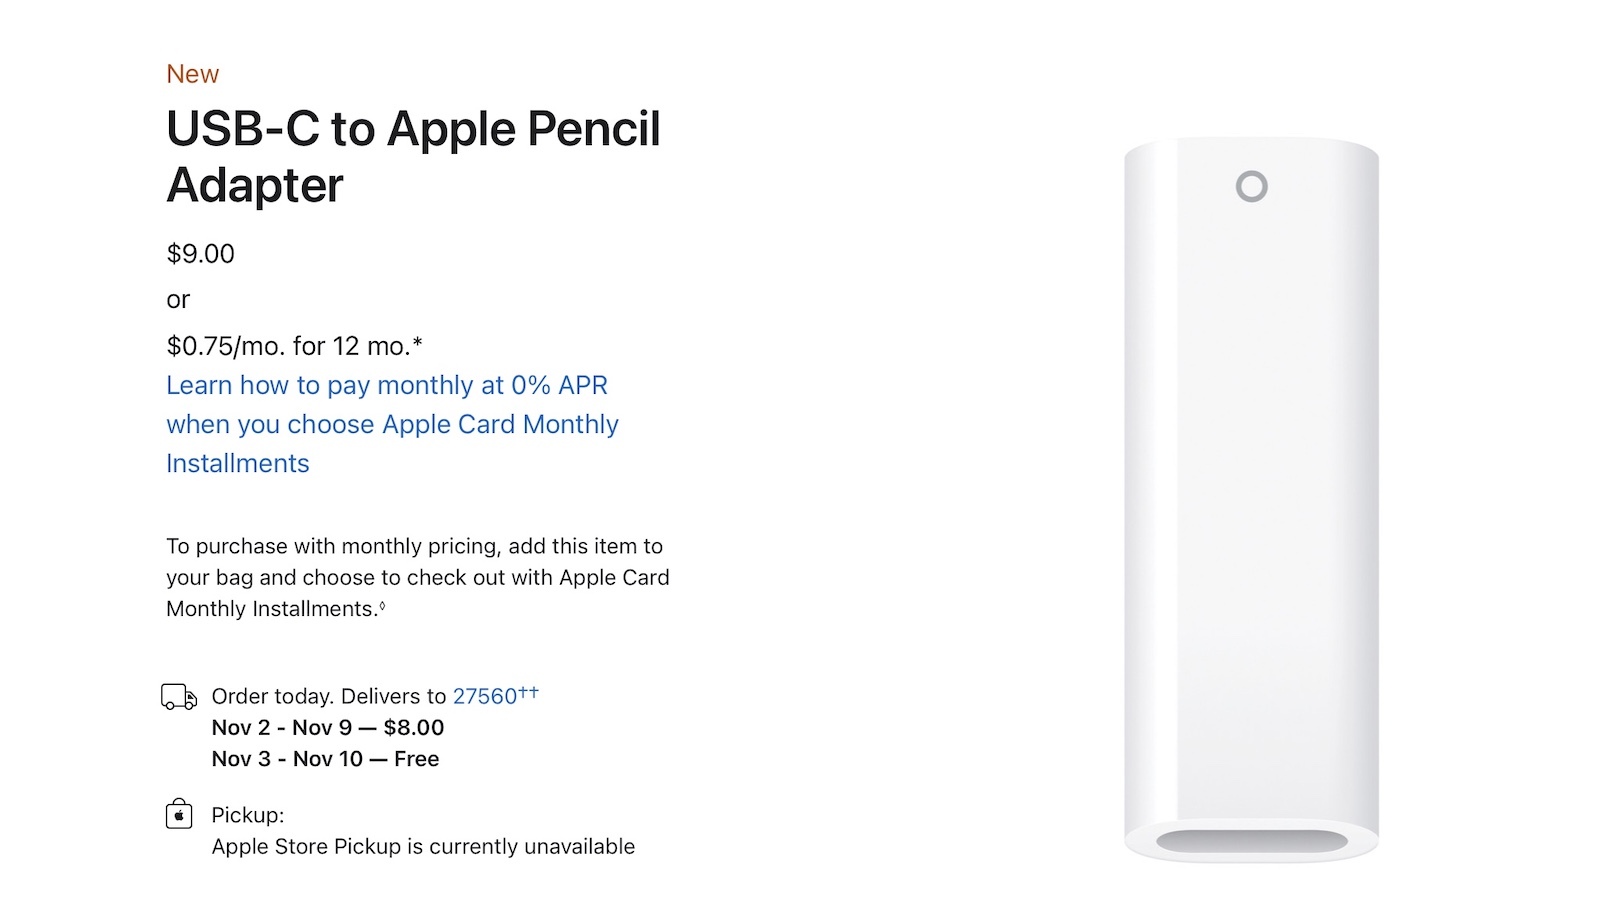 New iPad Only Supports First-Gen Apple Pencil, Requires Adapter to Charge